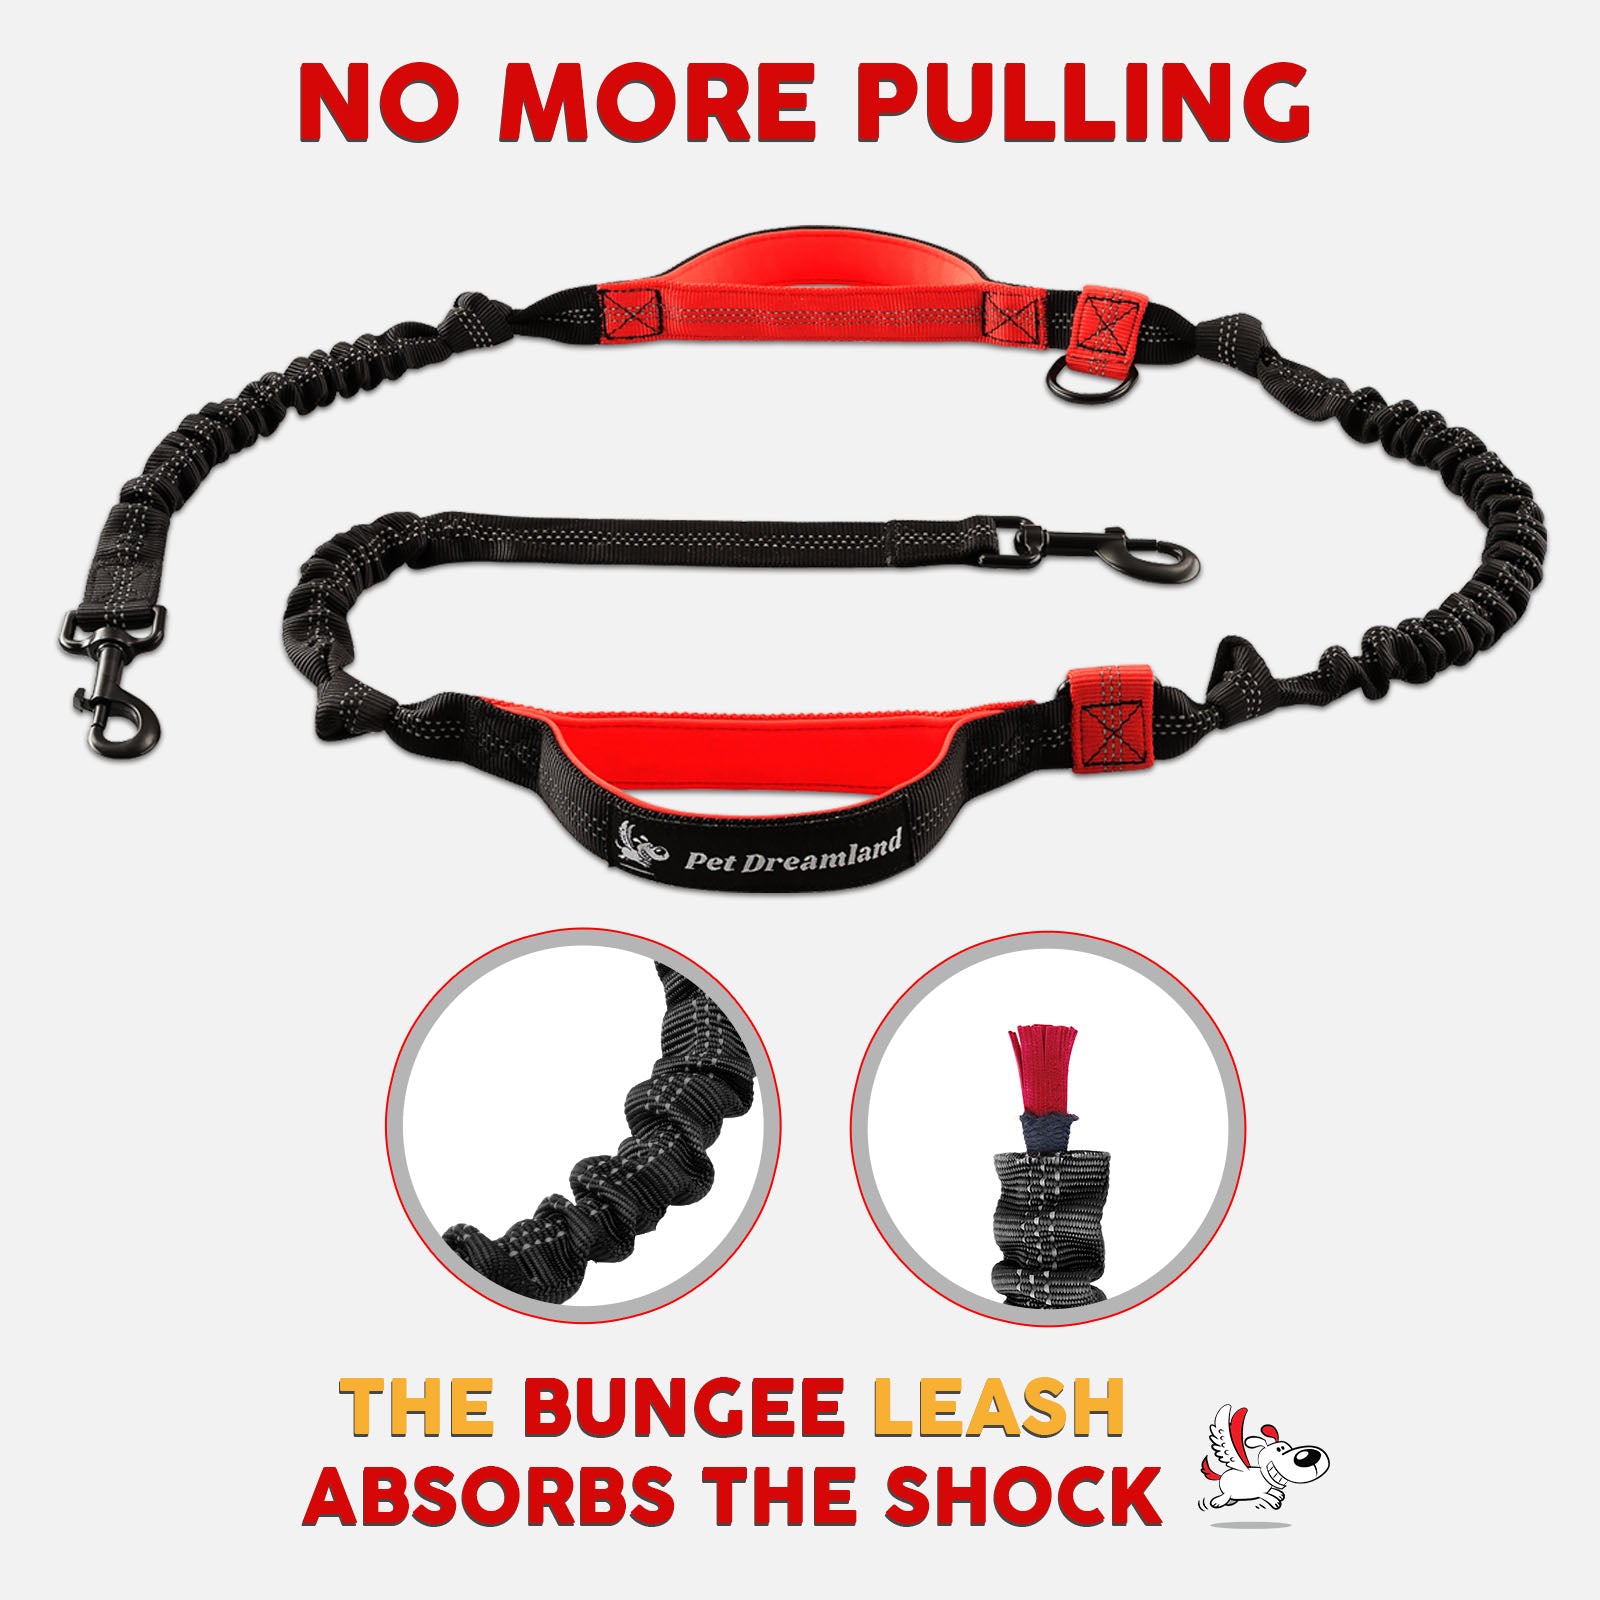 Extra Long Hands Free Dog Leash for One Large Dog